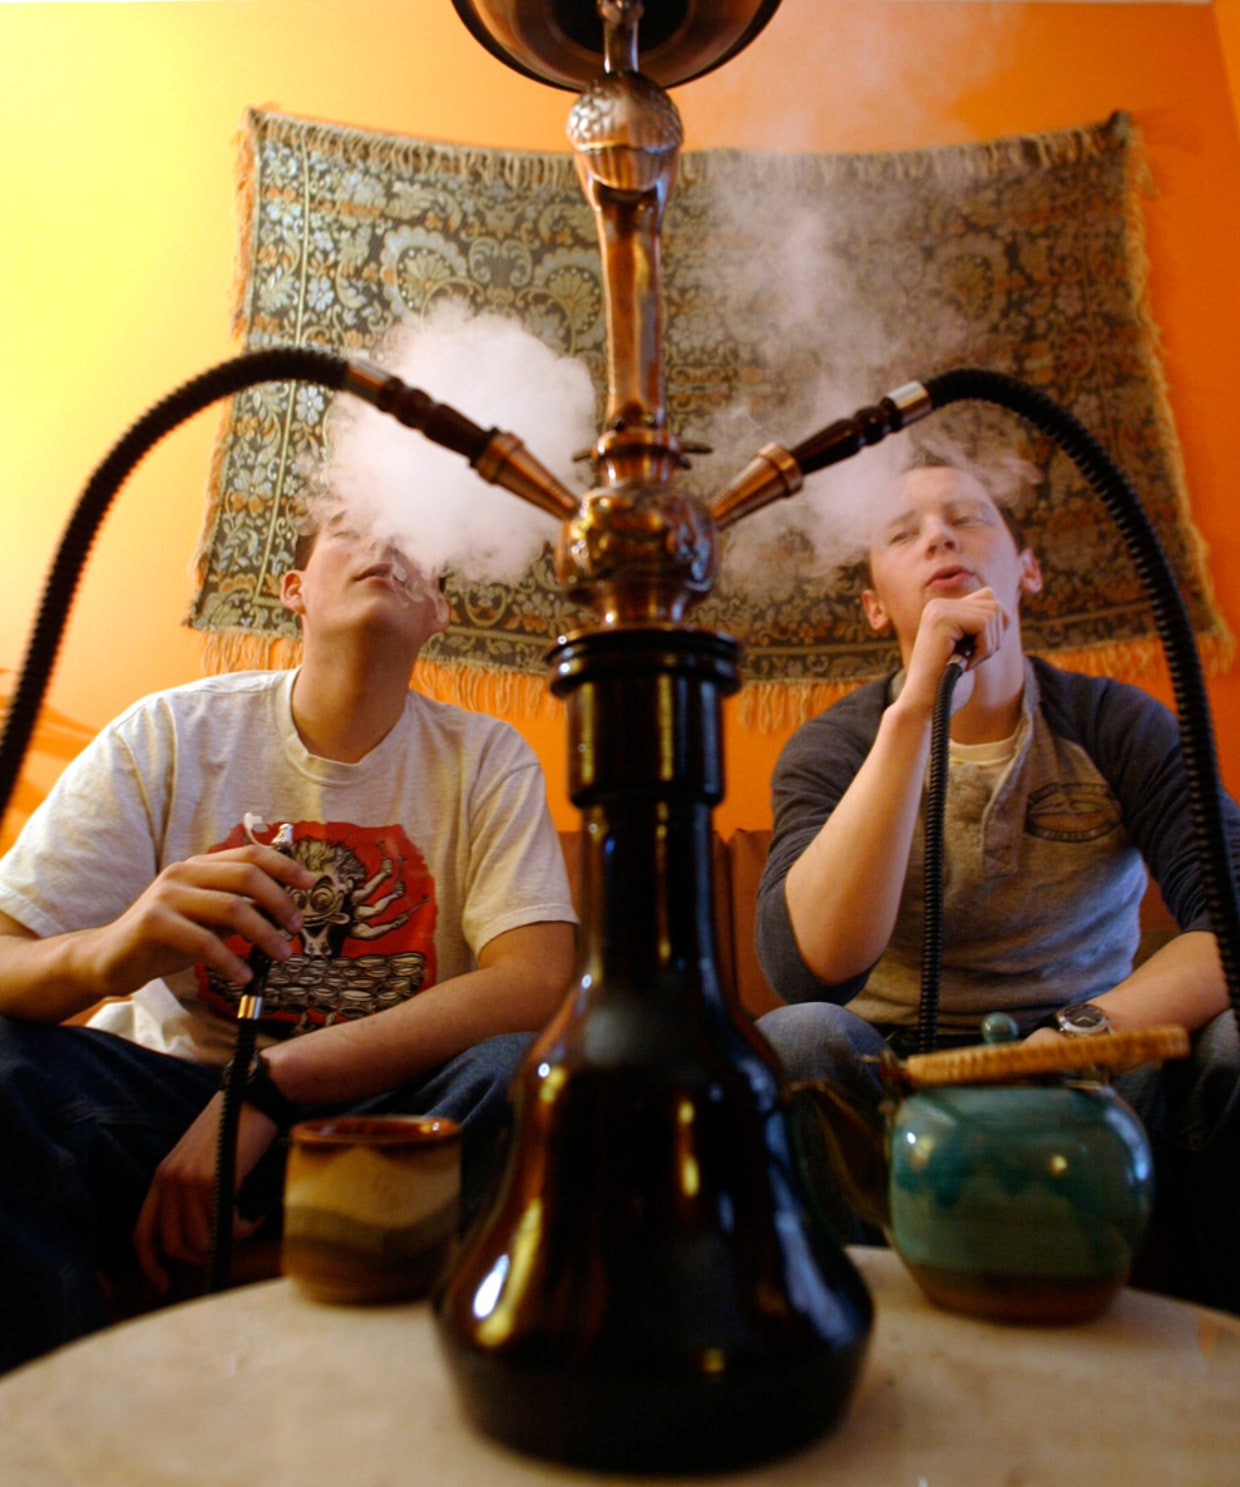 Hookah bars find a place in America